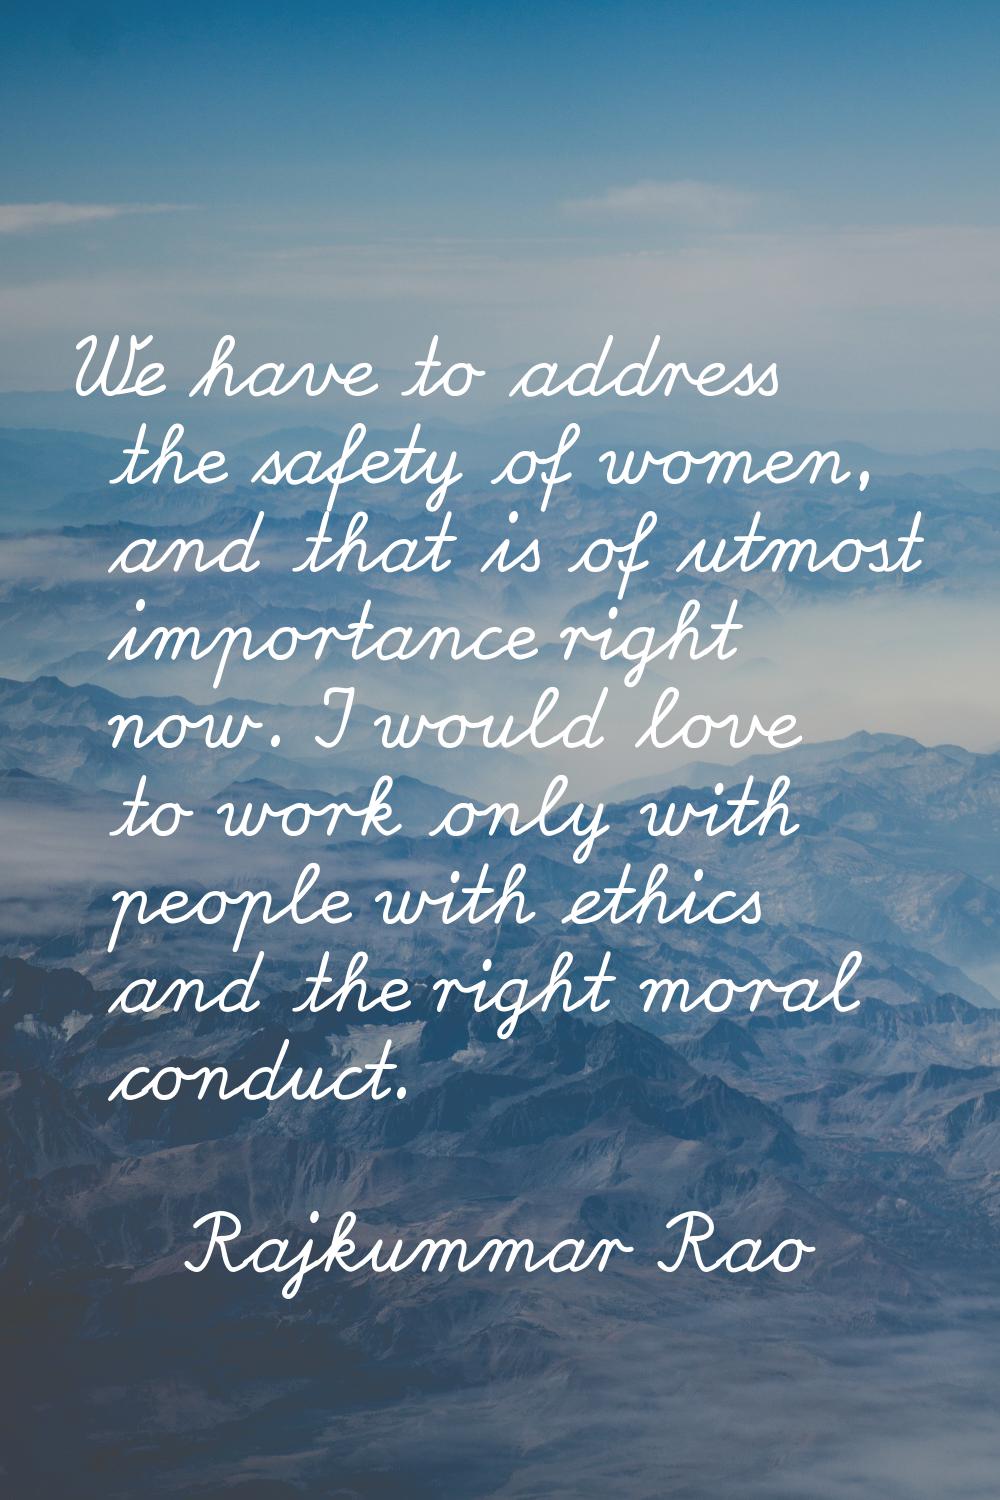 We have to address the safety of women, and that is of utmost importance right now. I would love to